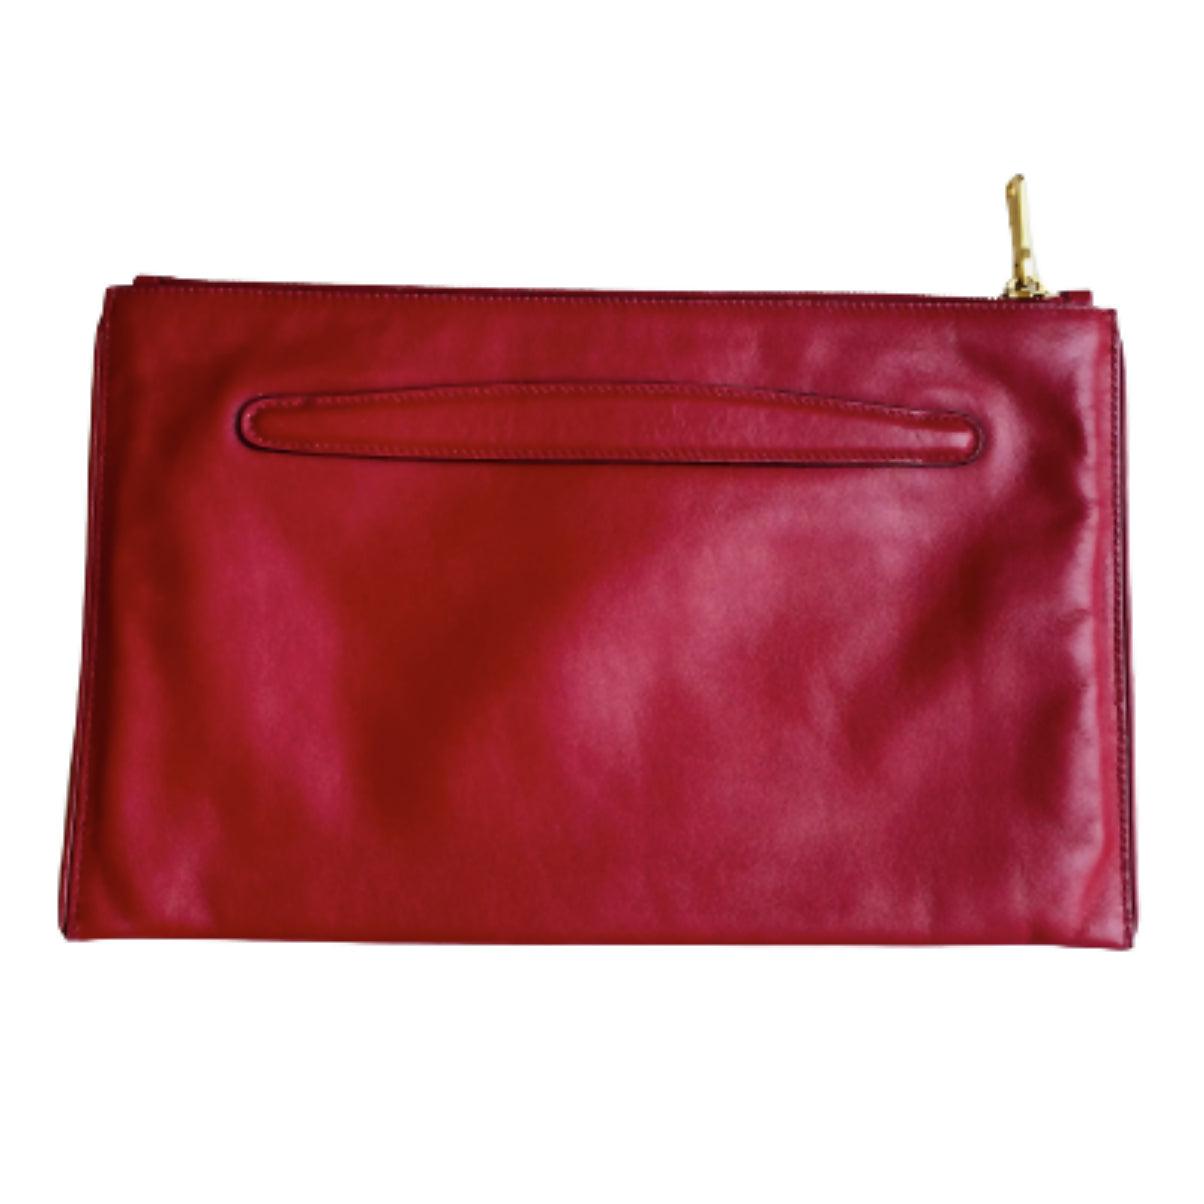 Gold Stud Leather Clutch Bag - Endless